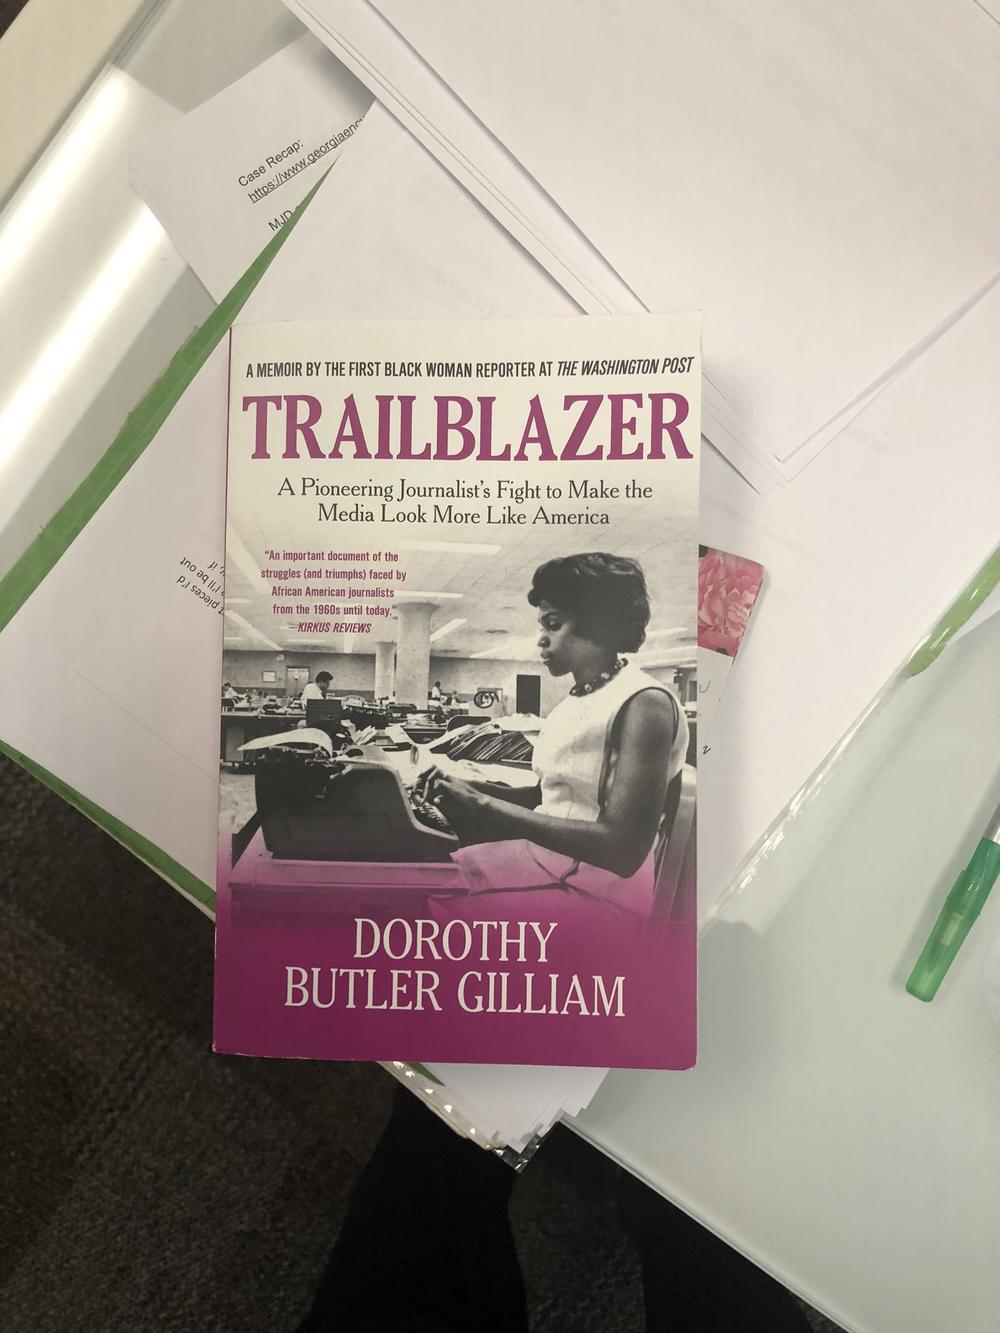 Author Dorothy Butler Gilliam reflects on life in media as the first black woman reporter at "The Washington Post."